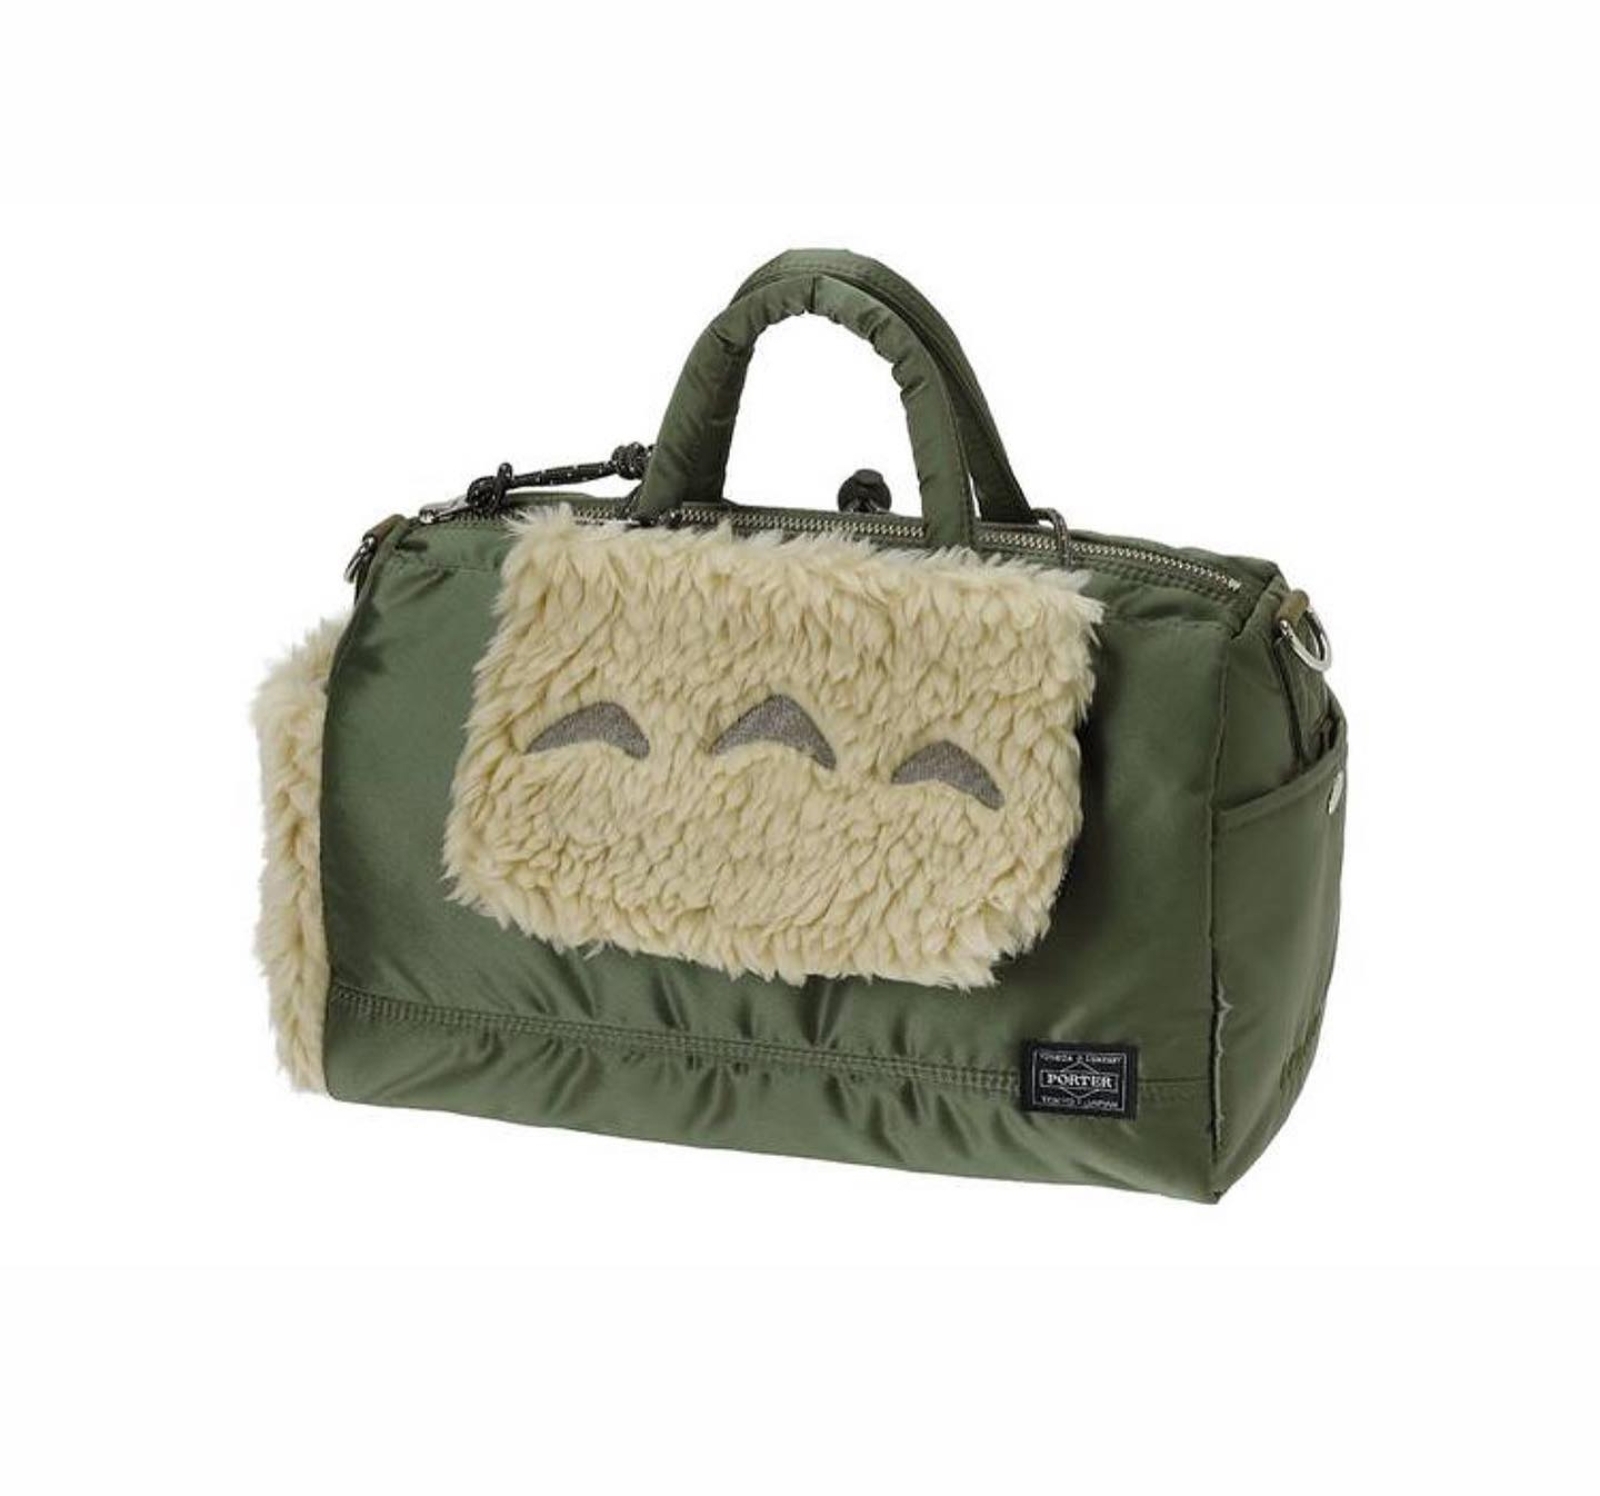 A bag that collaborated with Ghibli Totoro.